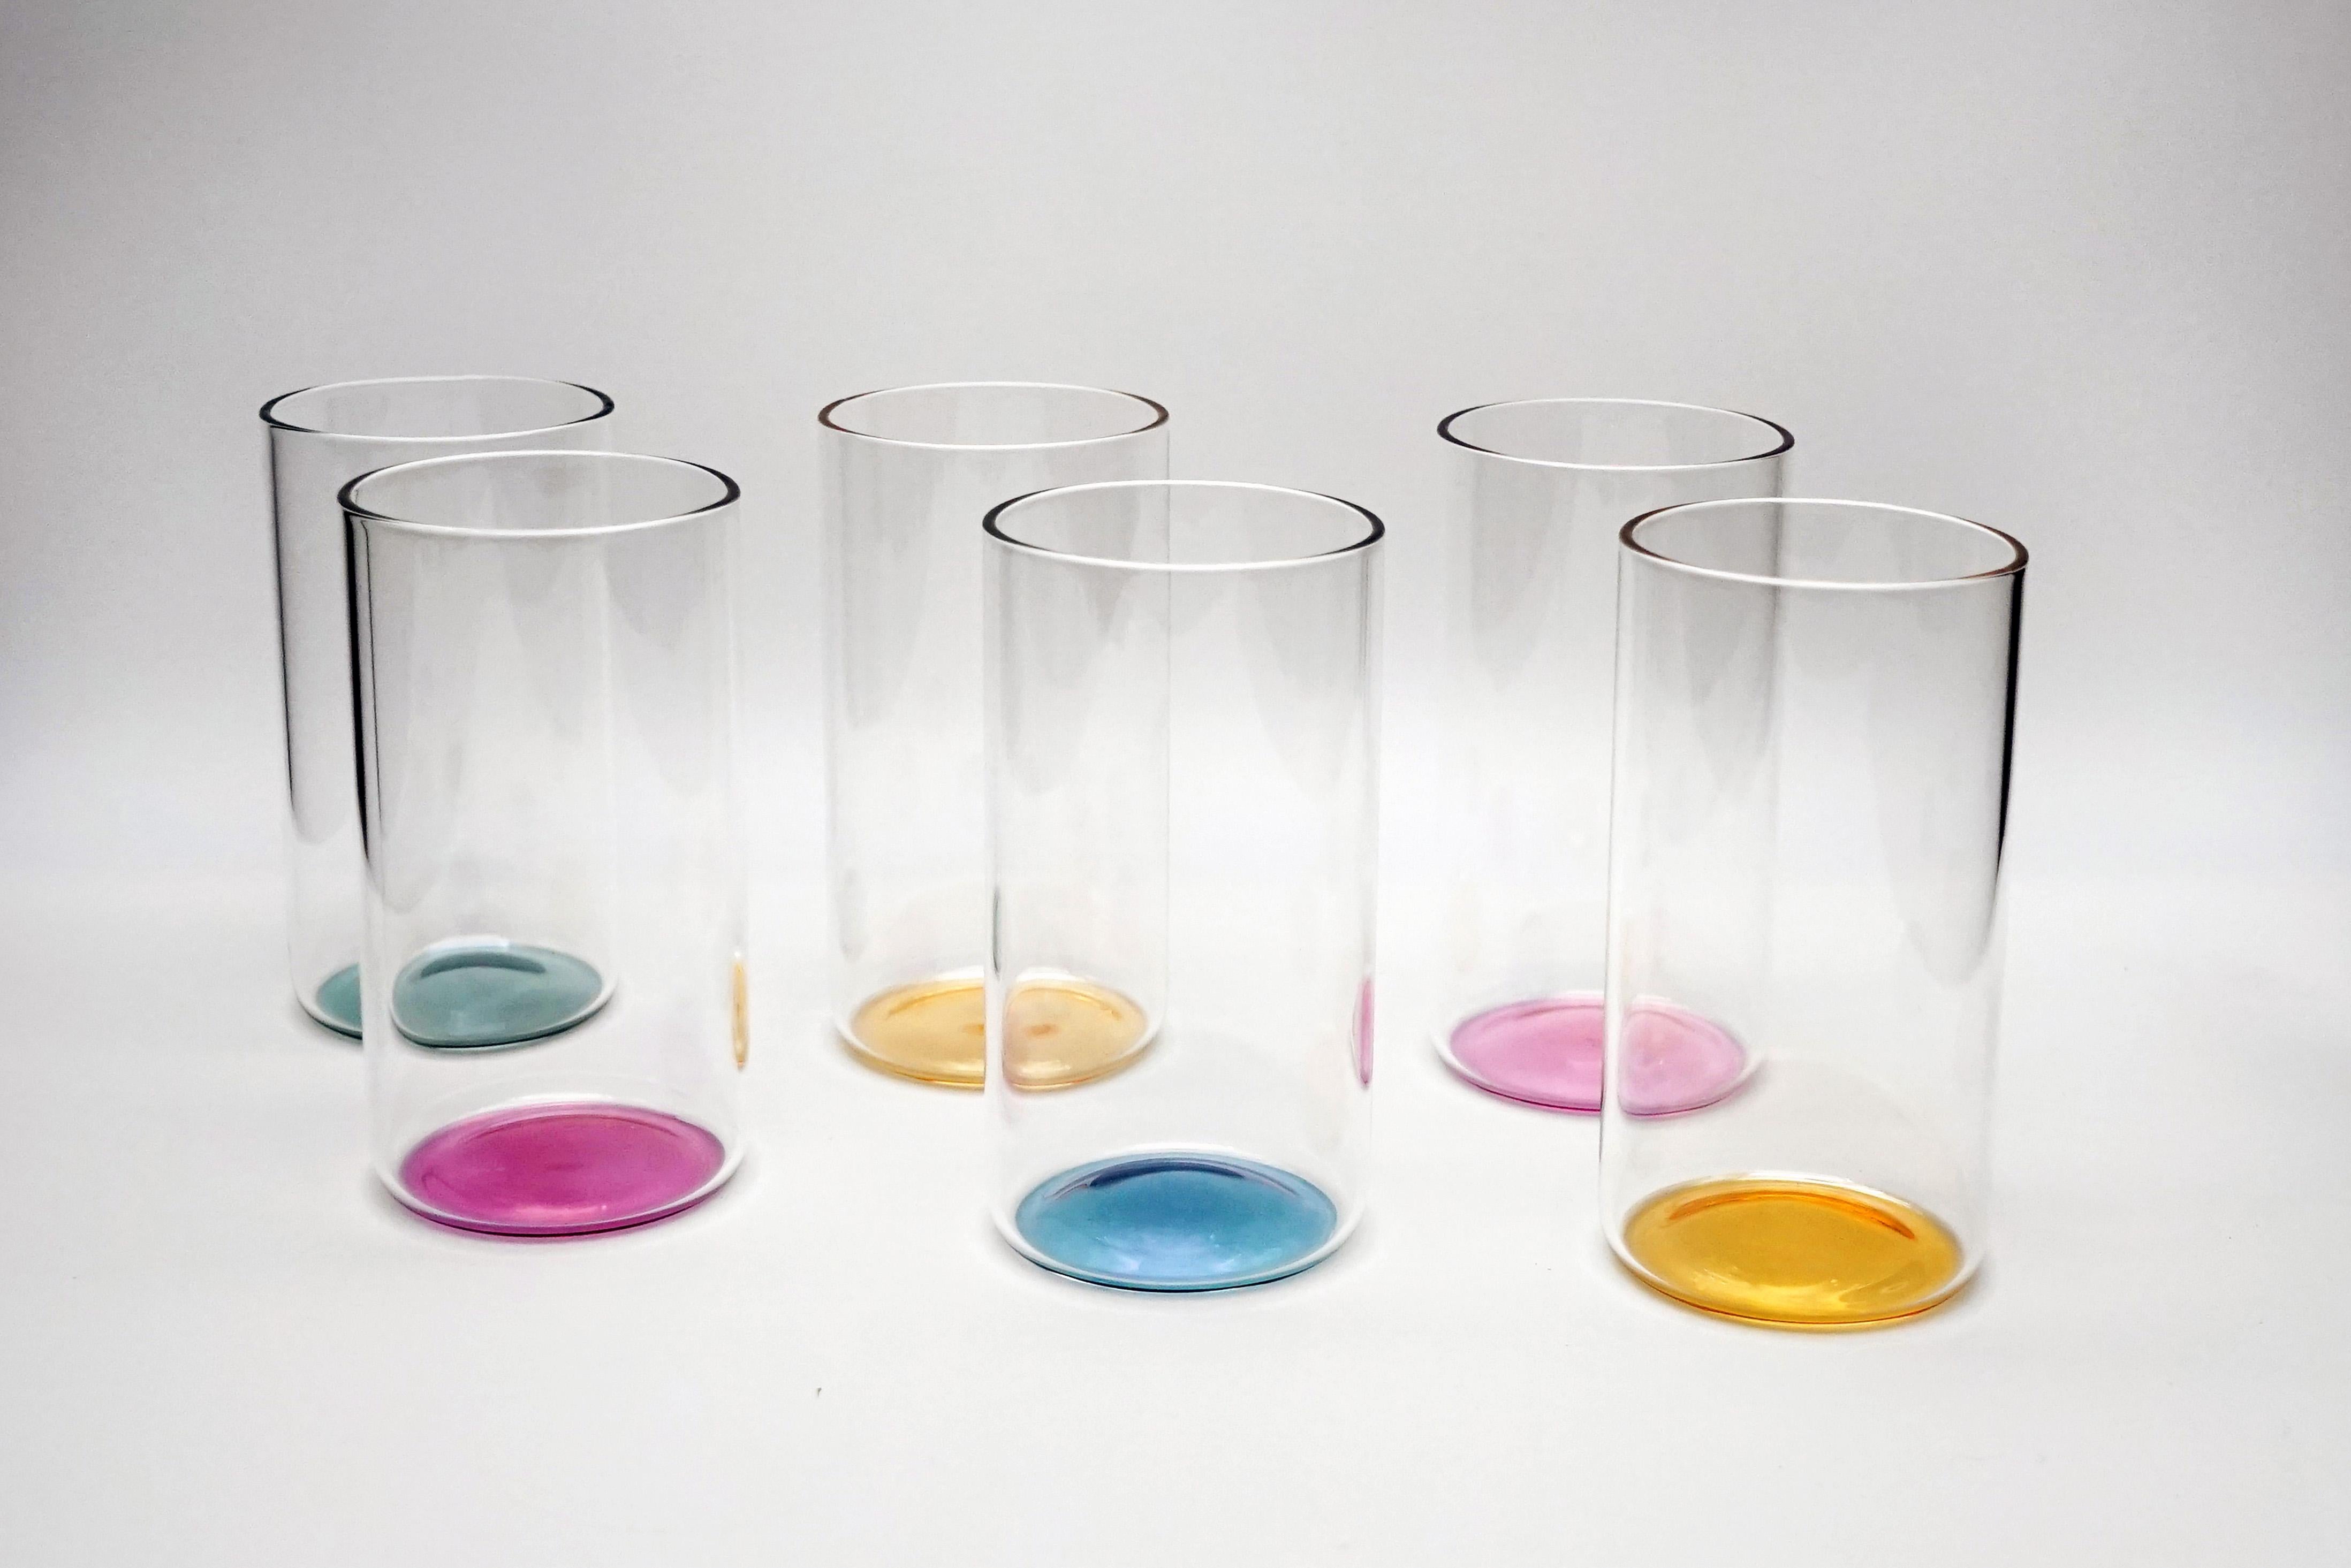 Set of 6 shot glass.
Dimensions of each glass : Ø7 x H12,5 cm
The “Iride” glass exploit the phenomenon of light refraction and play with the bottom color, transporting it to the surface. Iride is made for the water, perfect liquid for the